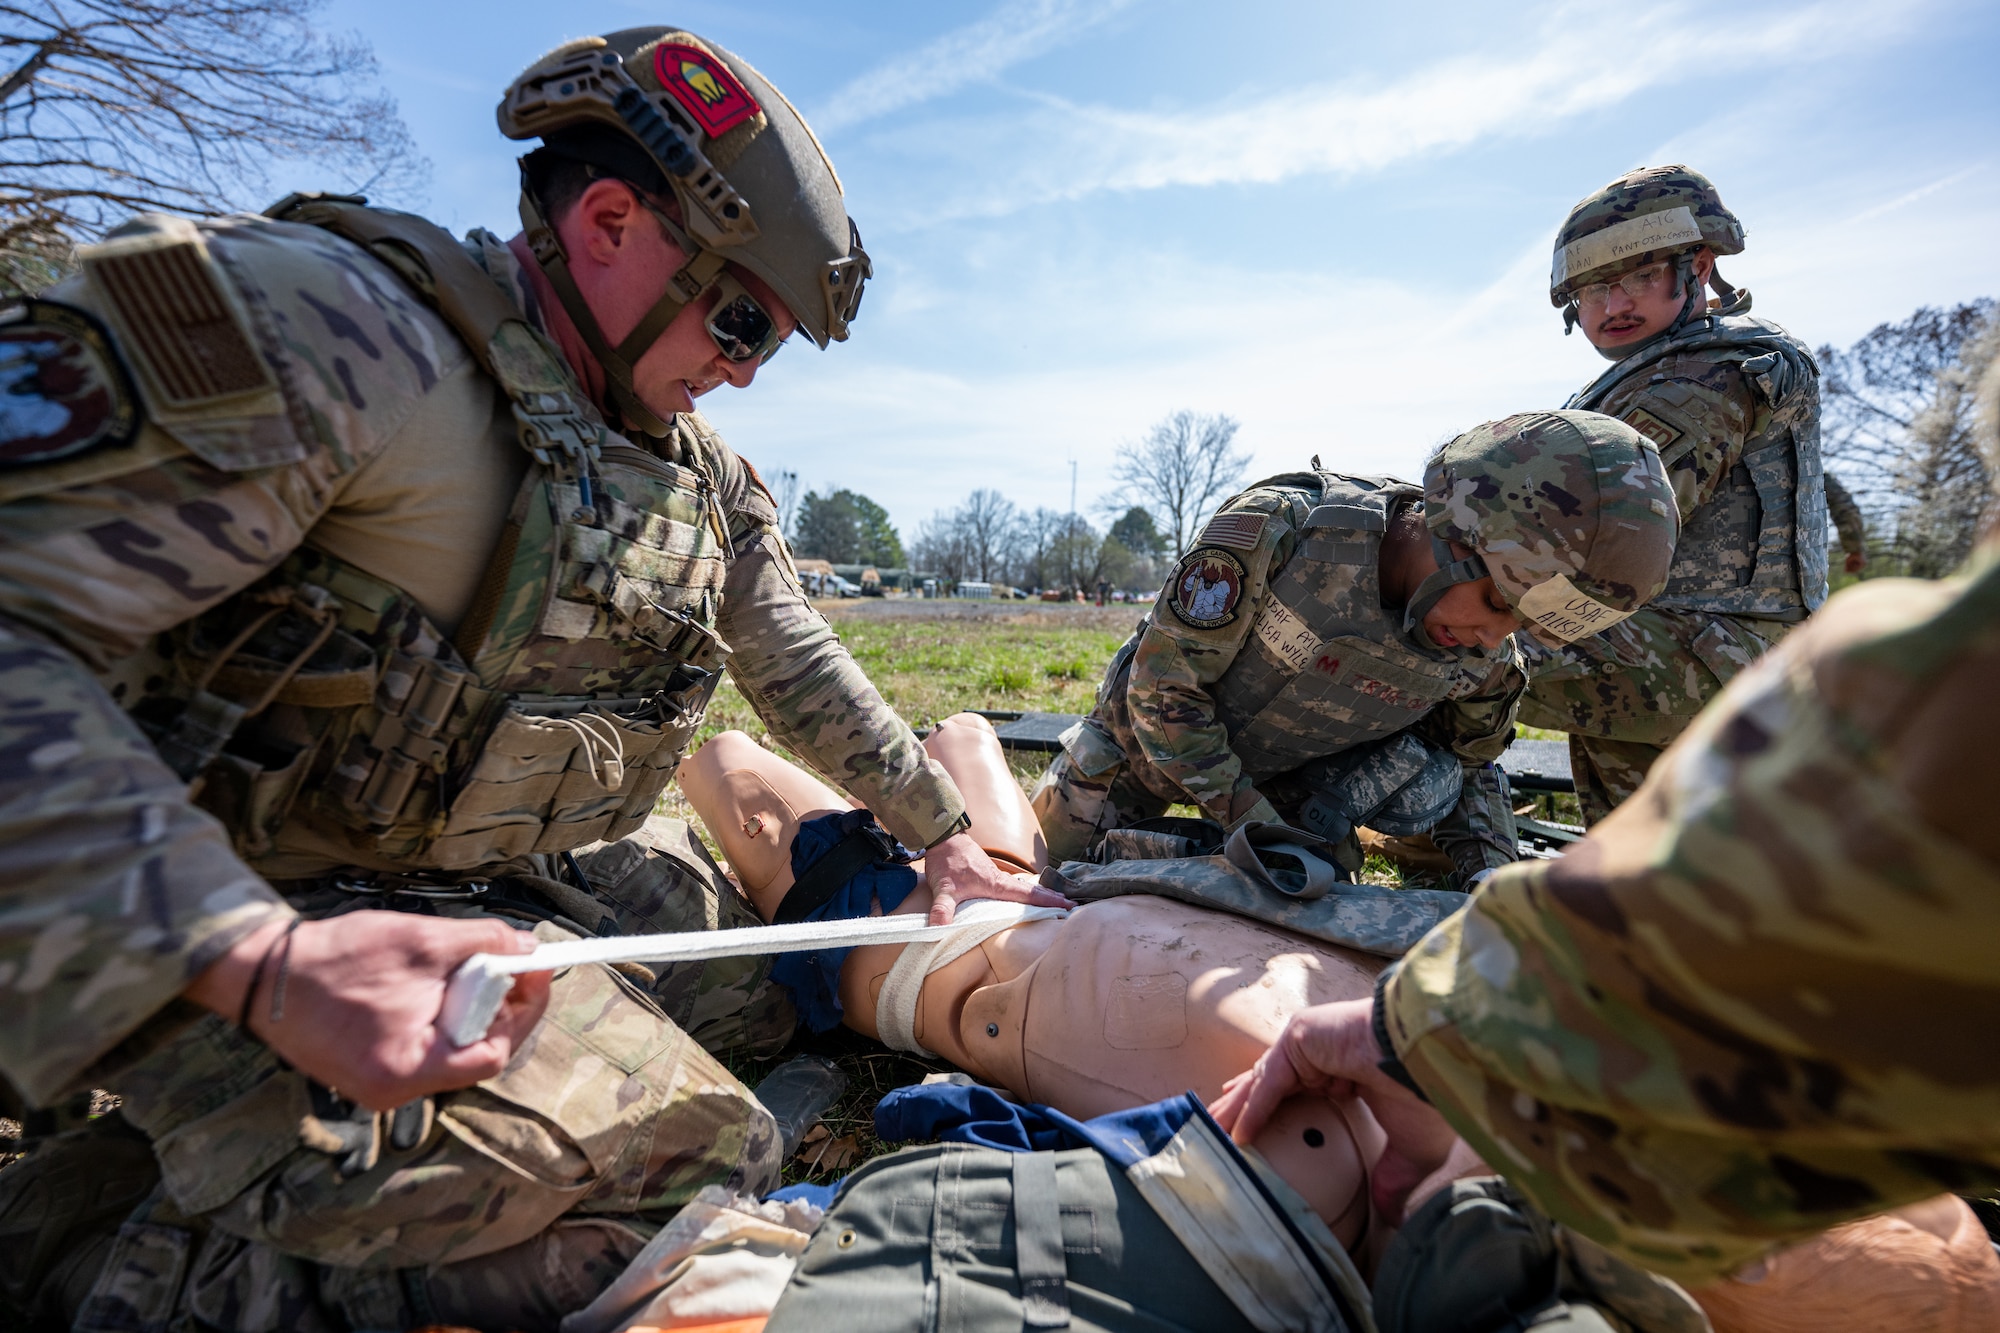 Airmen apply a tourniquet and perform tactical field care to a mannequin.